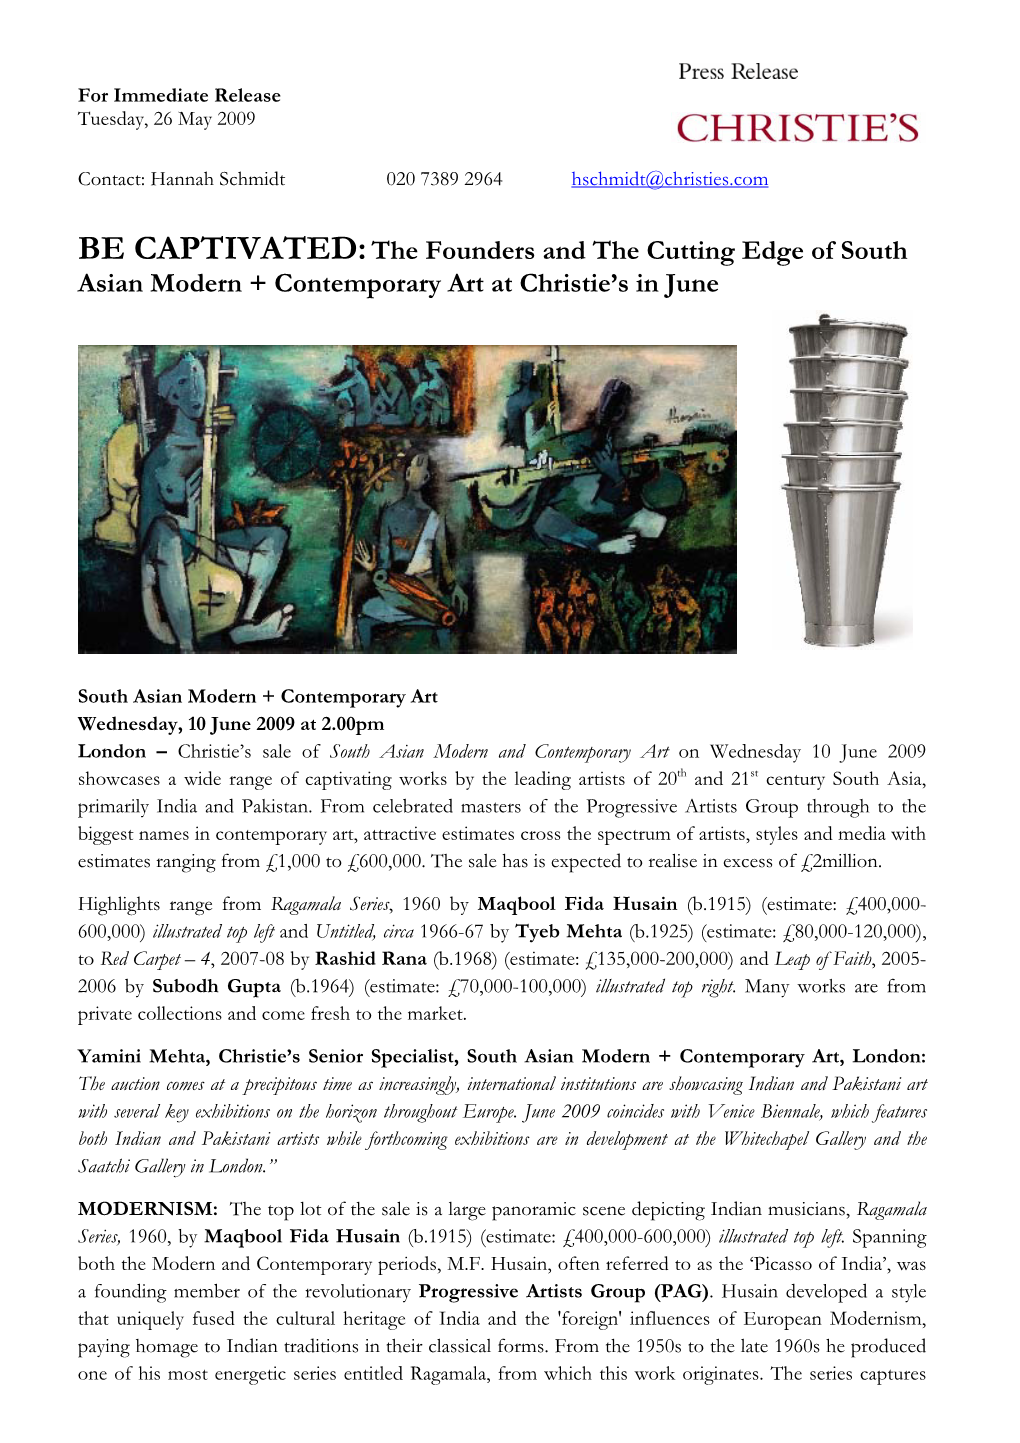 BE CAPTIVATED:The Founders and the Cutting Edge of South Asian Modern + Contemporary Art at Christie's in June